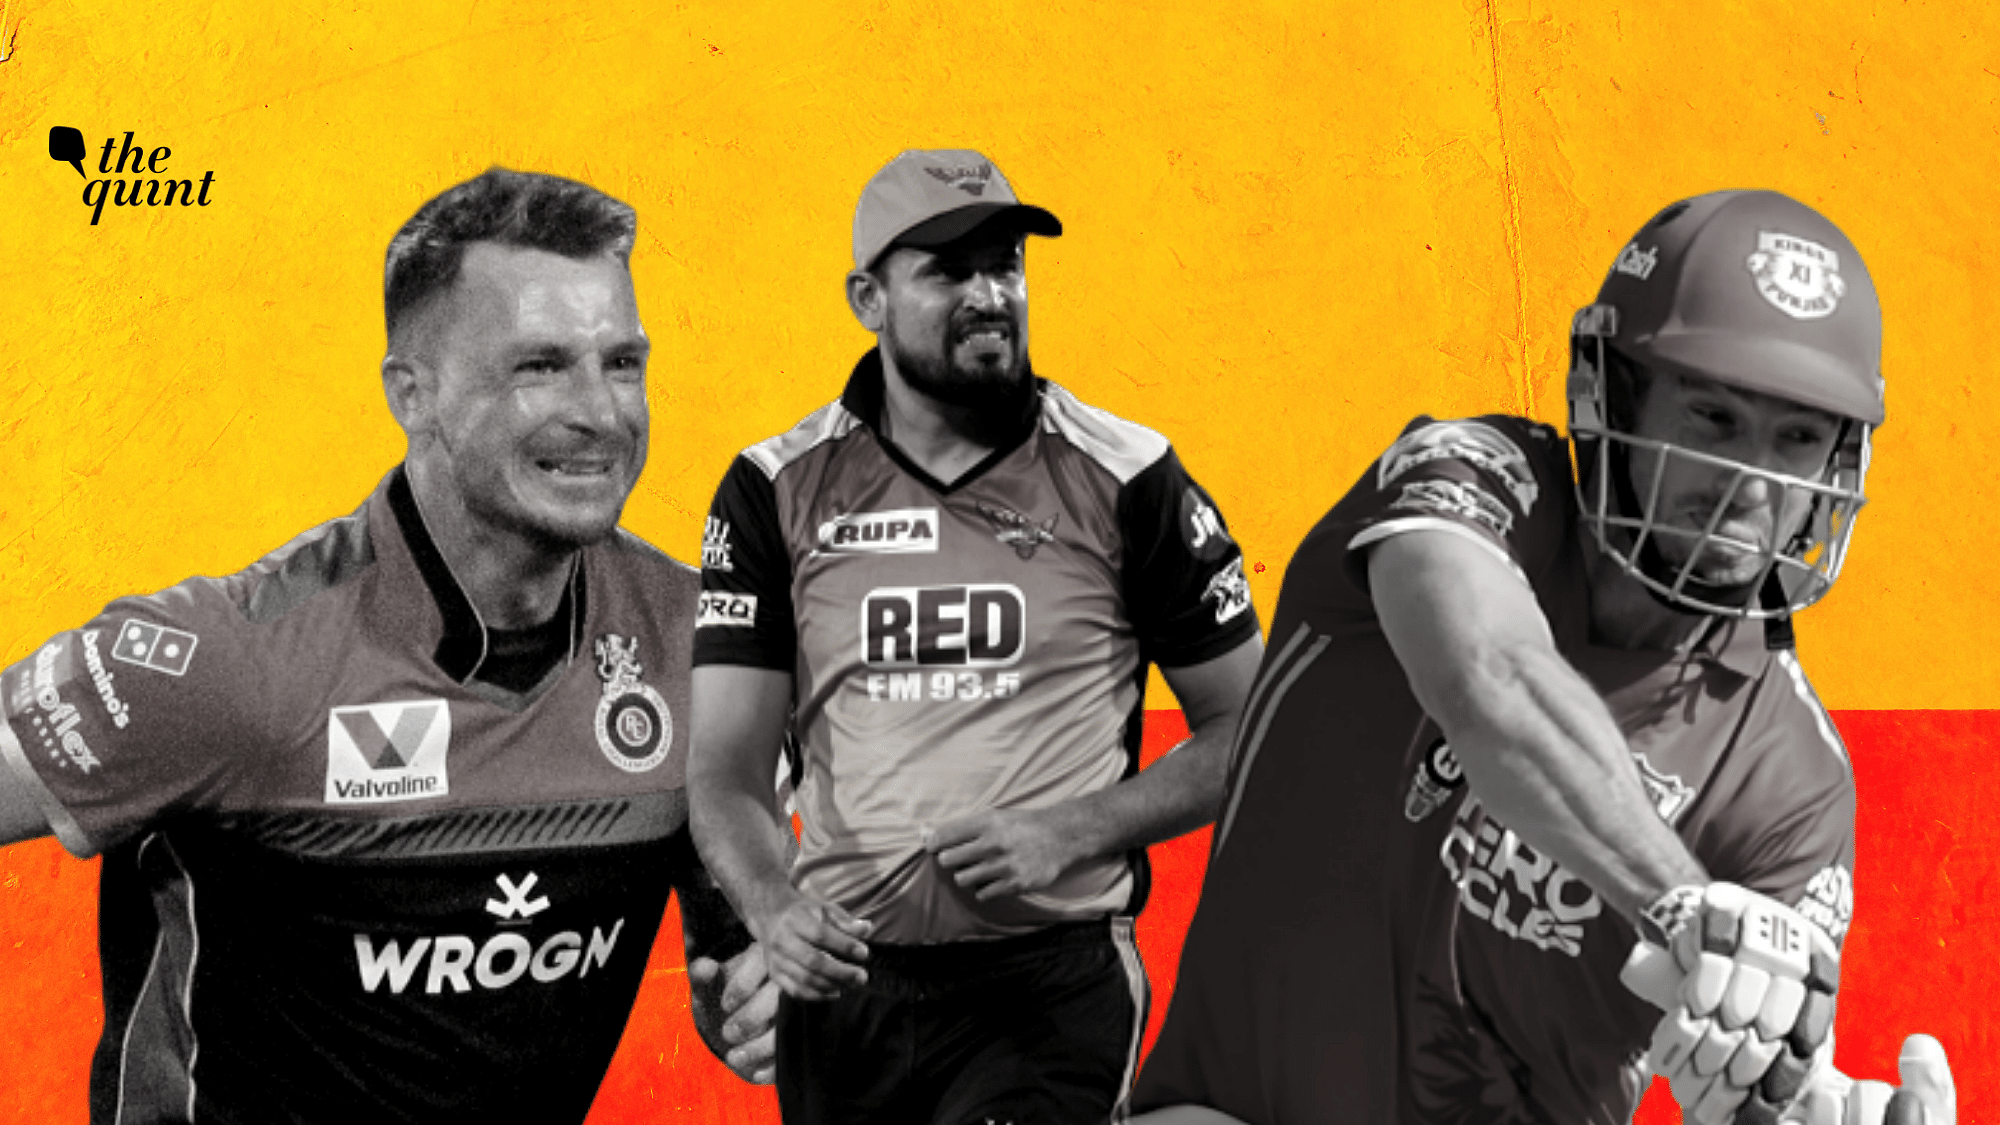 Dale Steyn (left), Yusuf Pathan (centre) and Shaun Marsh might be one of the few established names who might suffer due to their high base price.